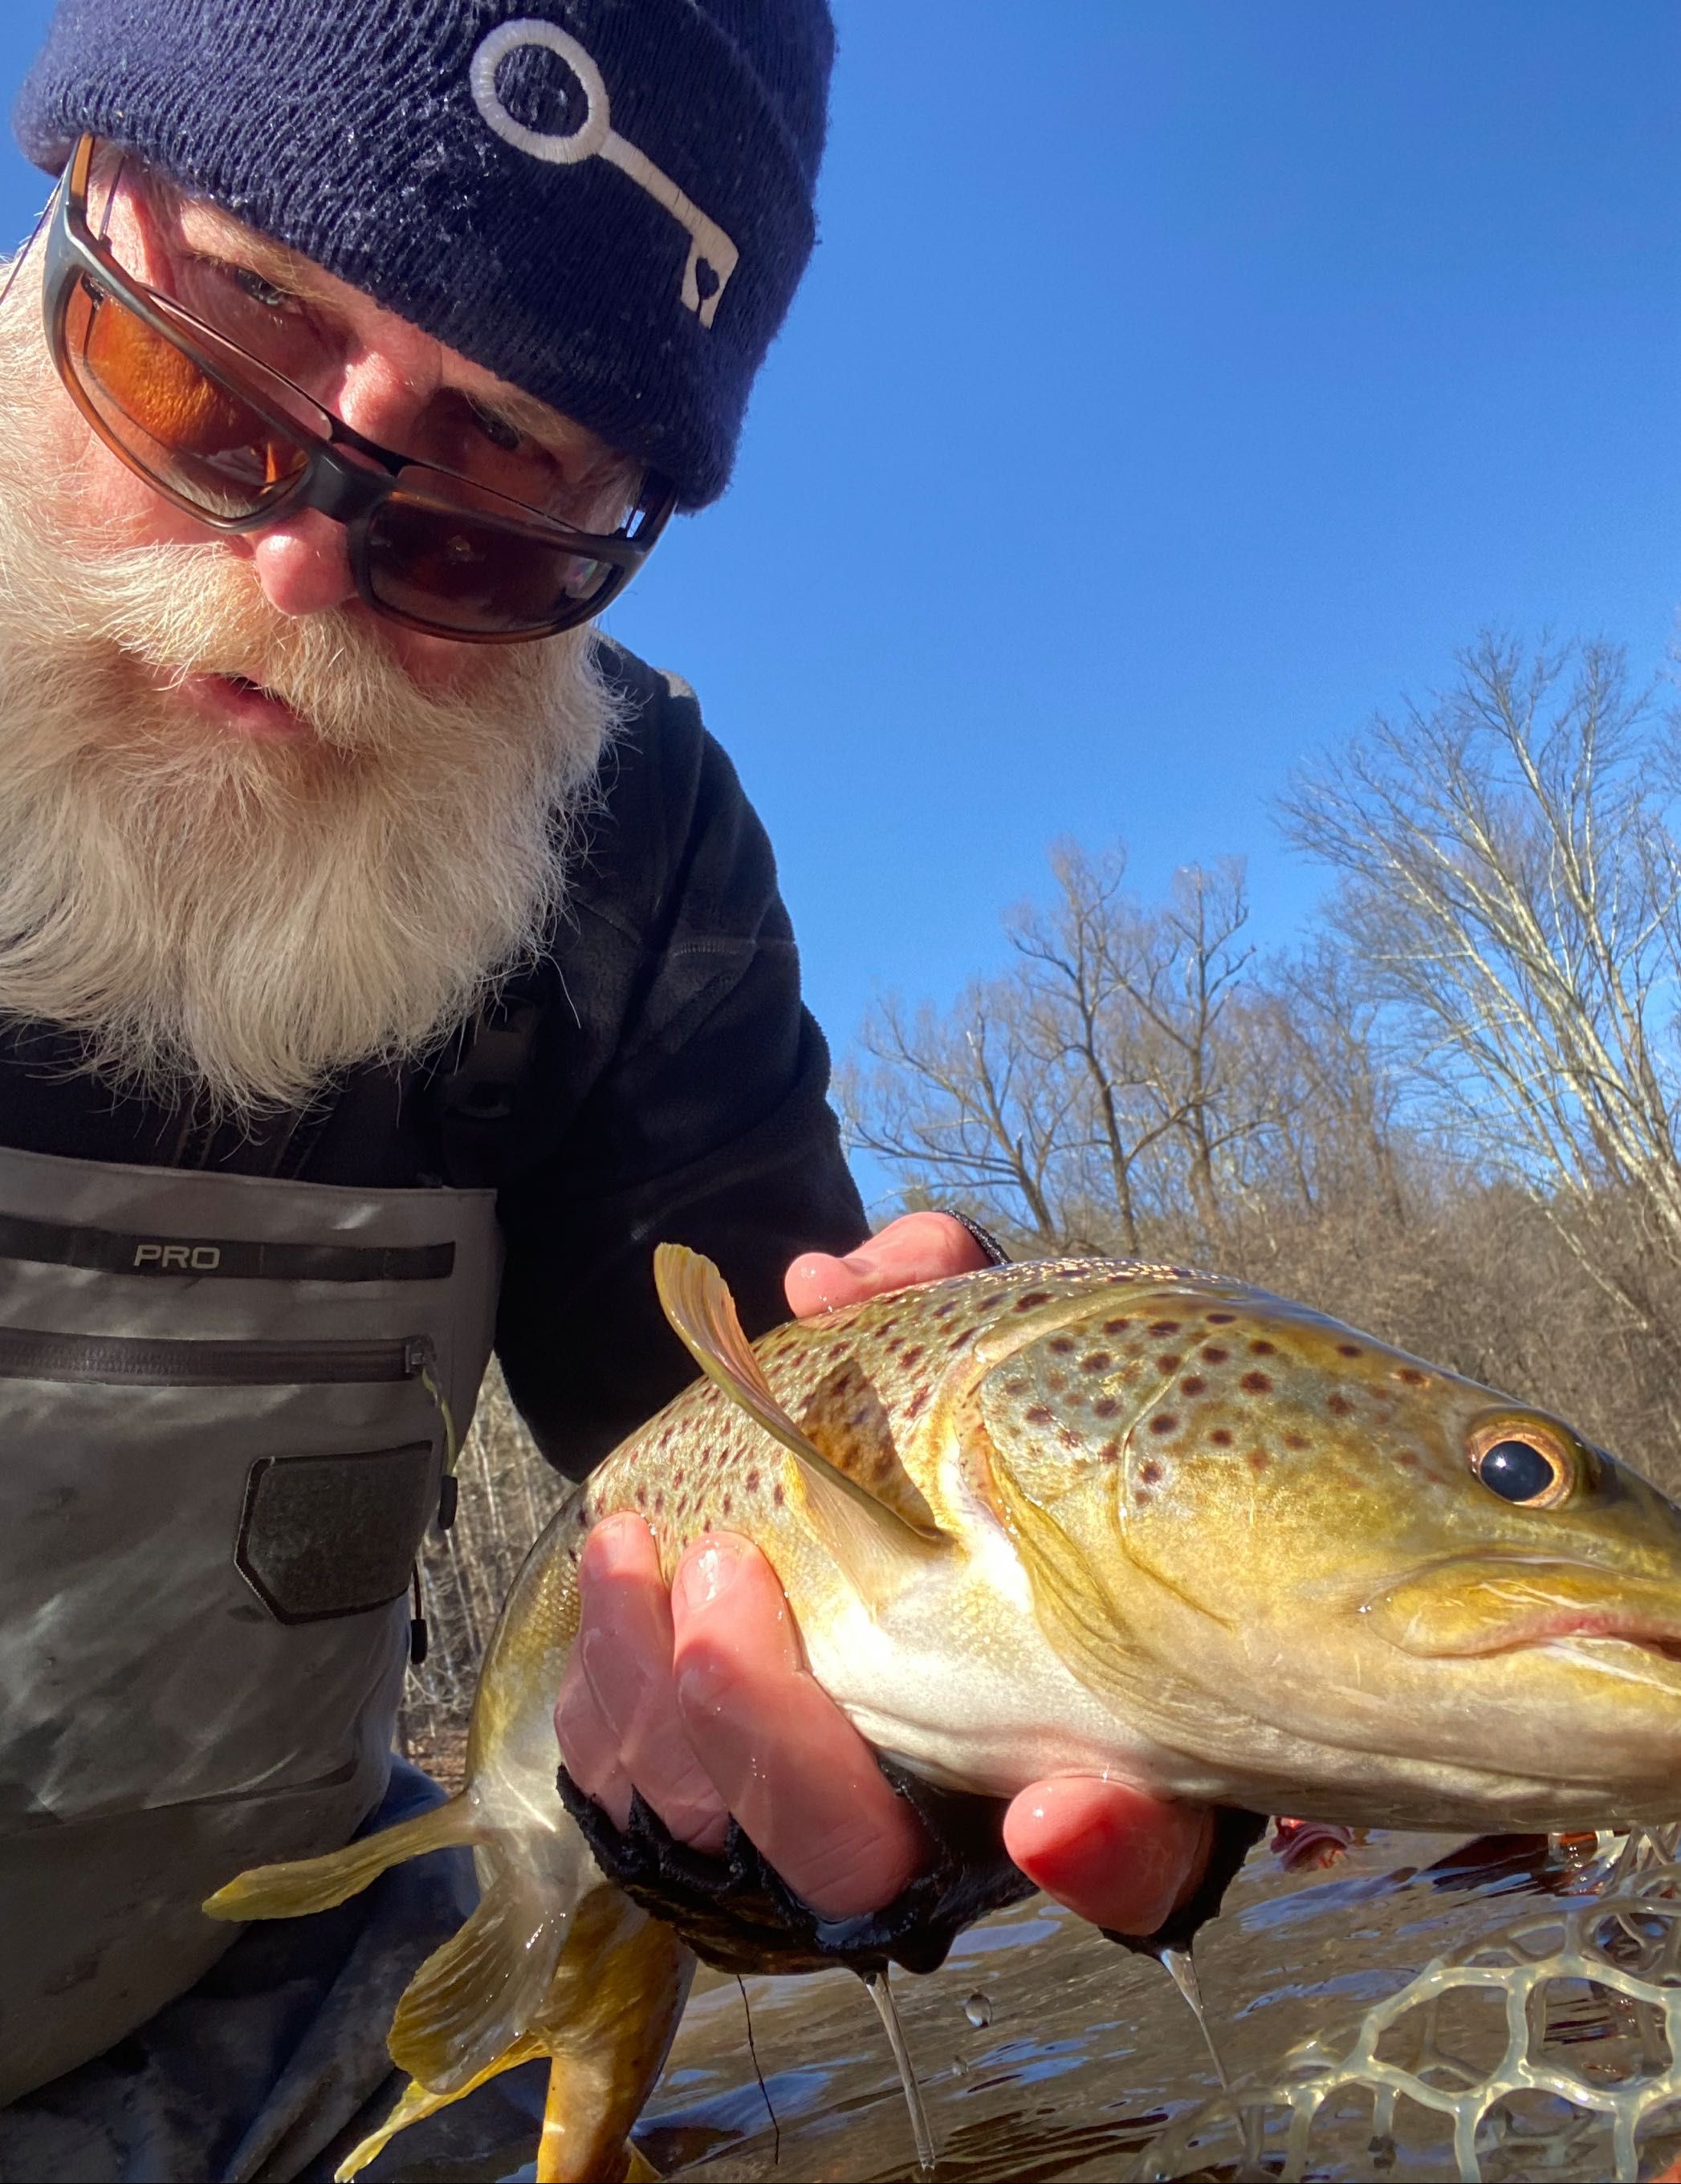 White trout offer steady action for anglers